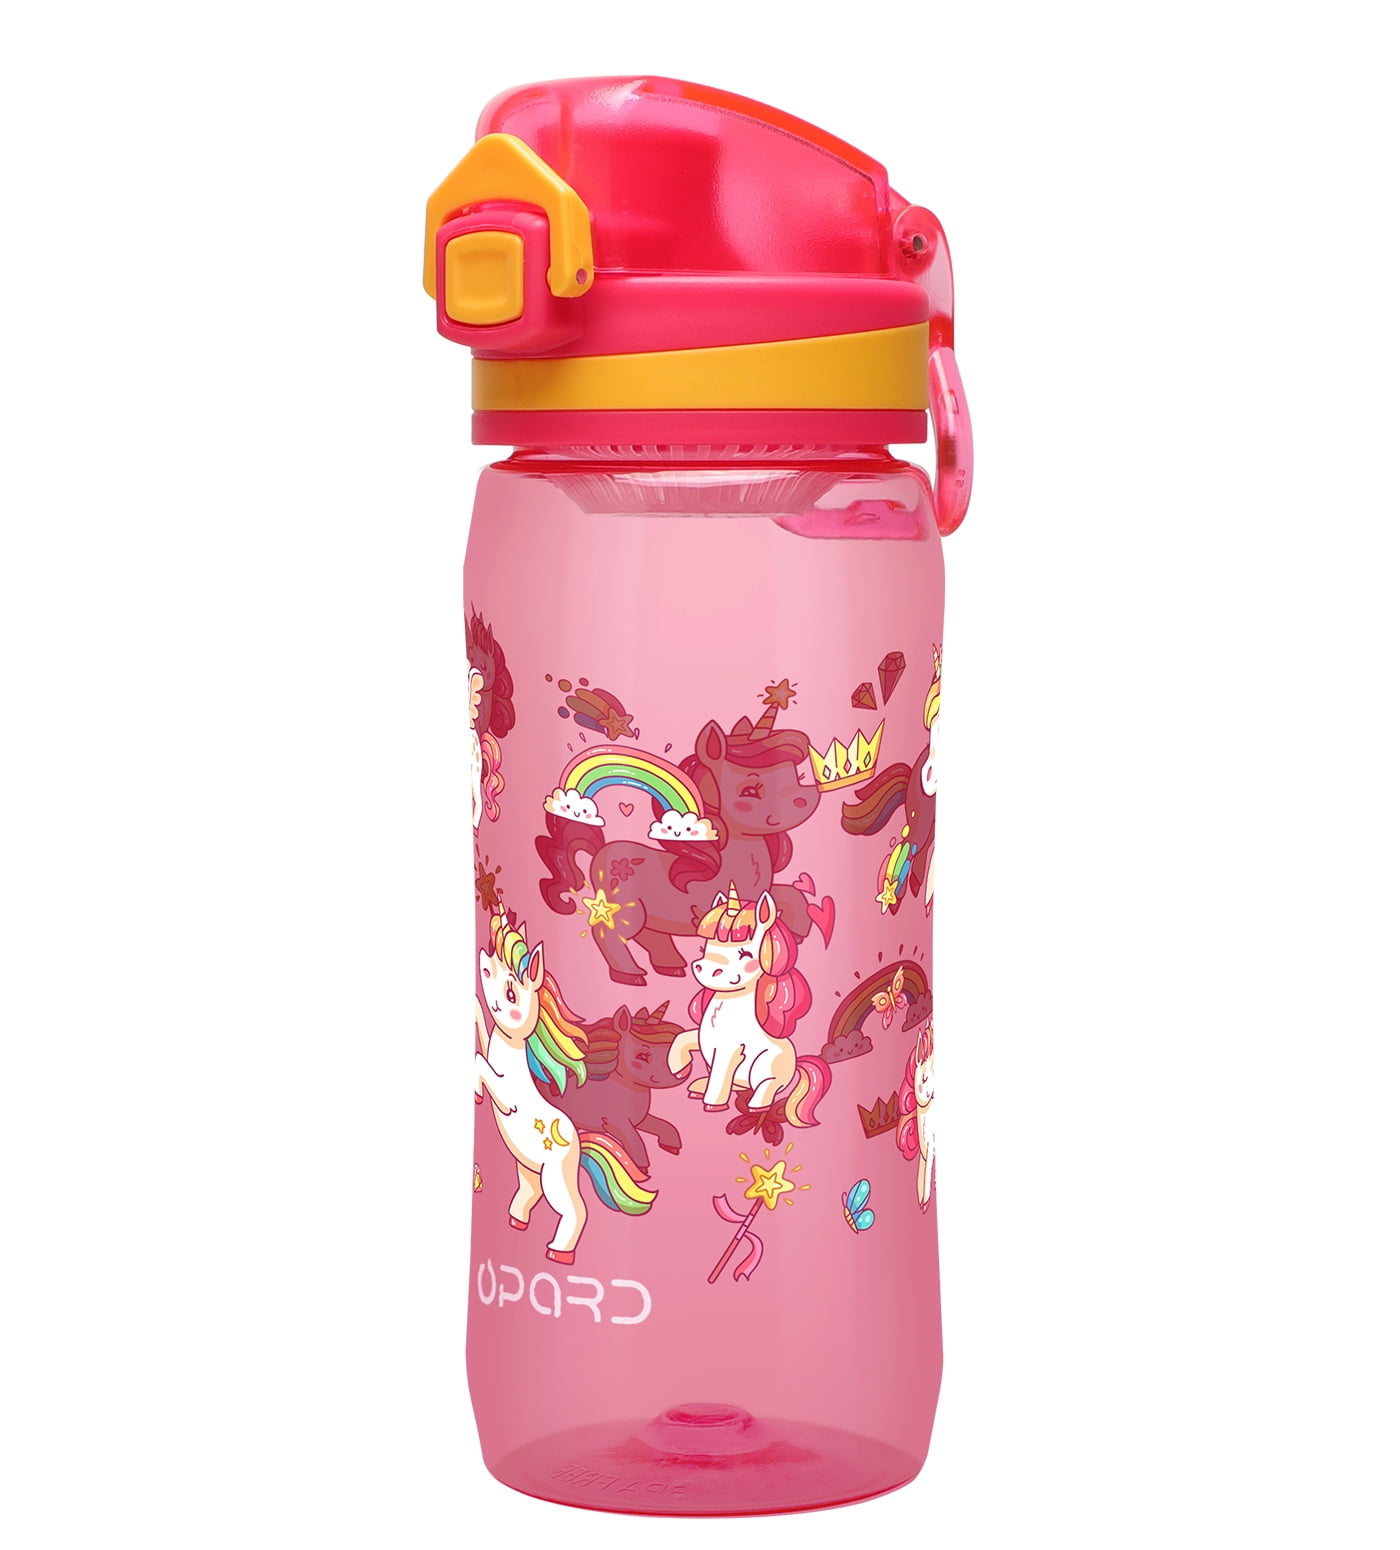 Oldley 17 oz Kids Water Bottle with Straw Lid BPA-Free Reusable